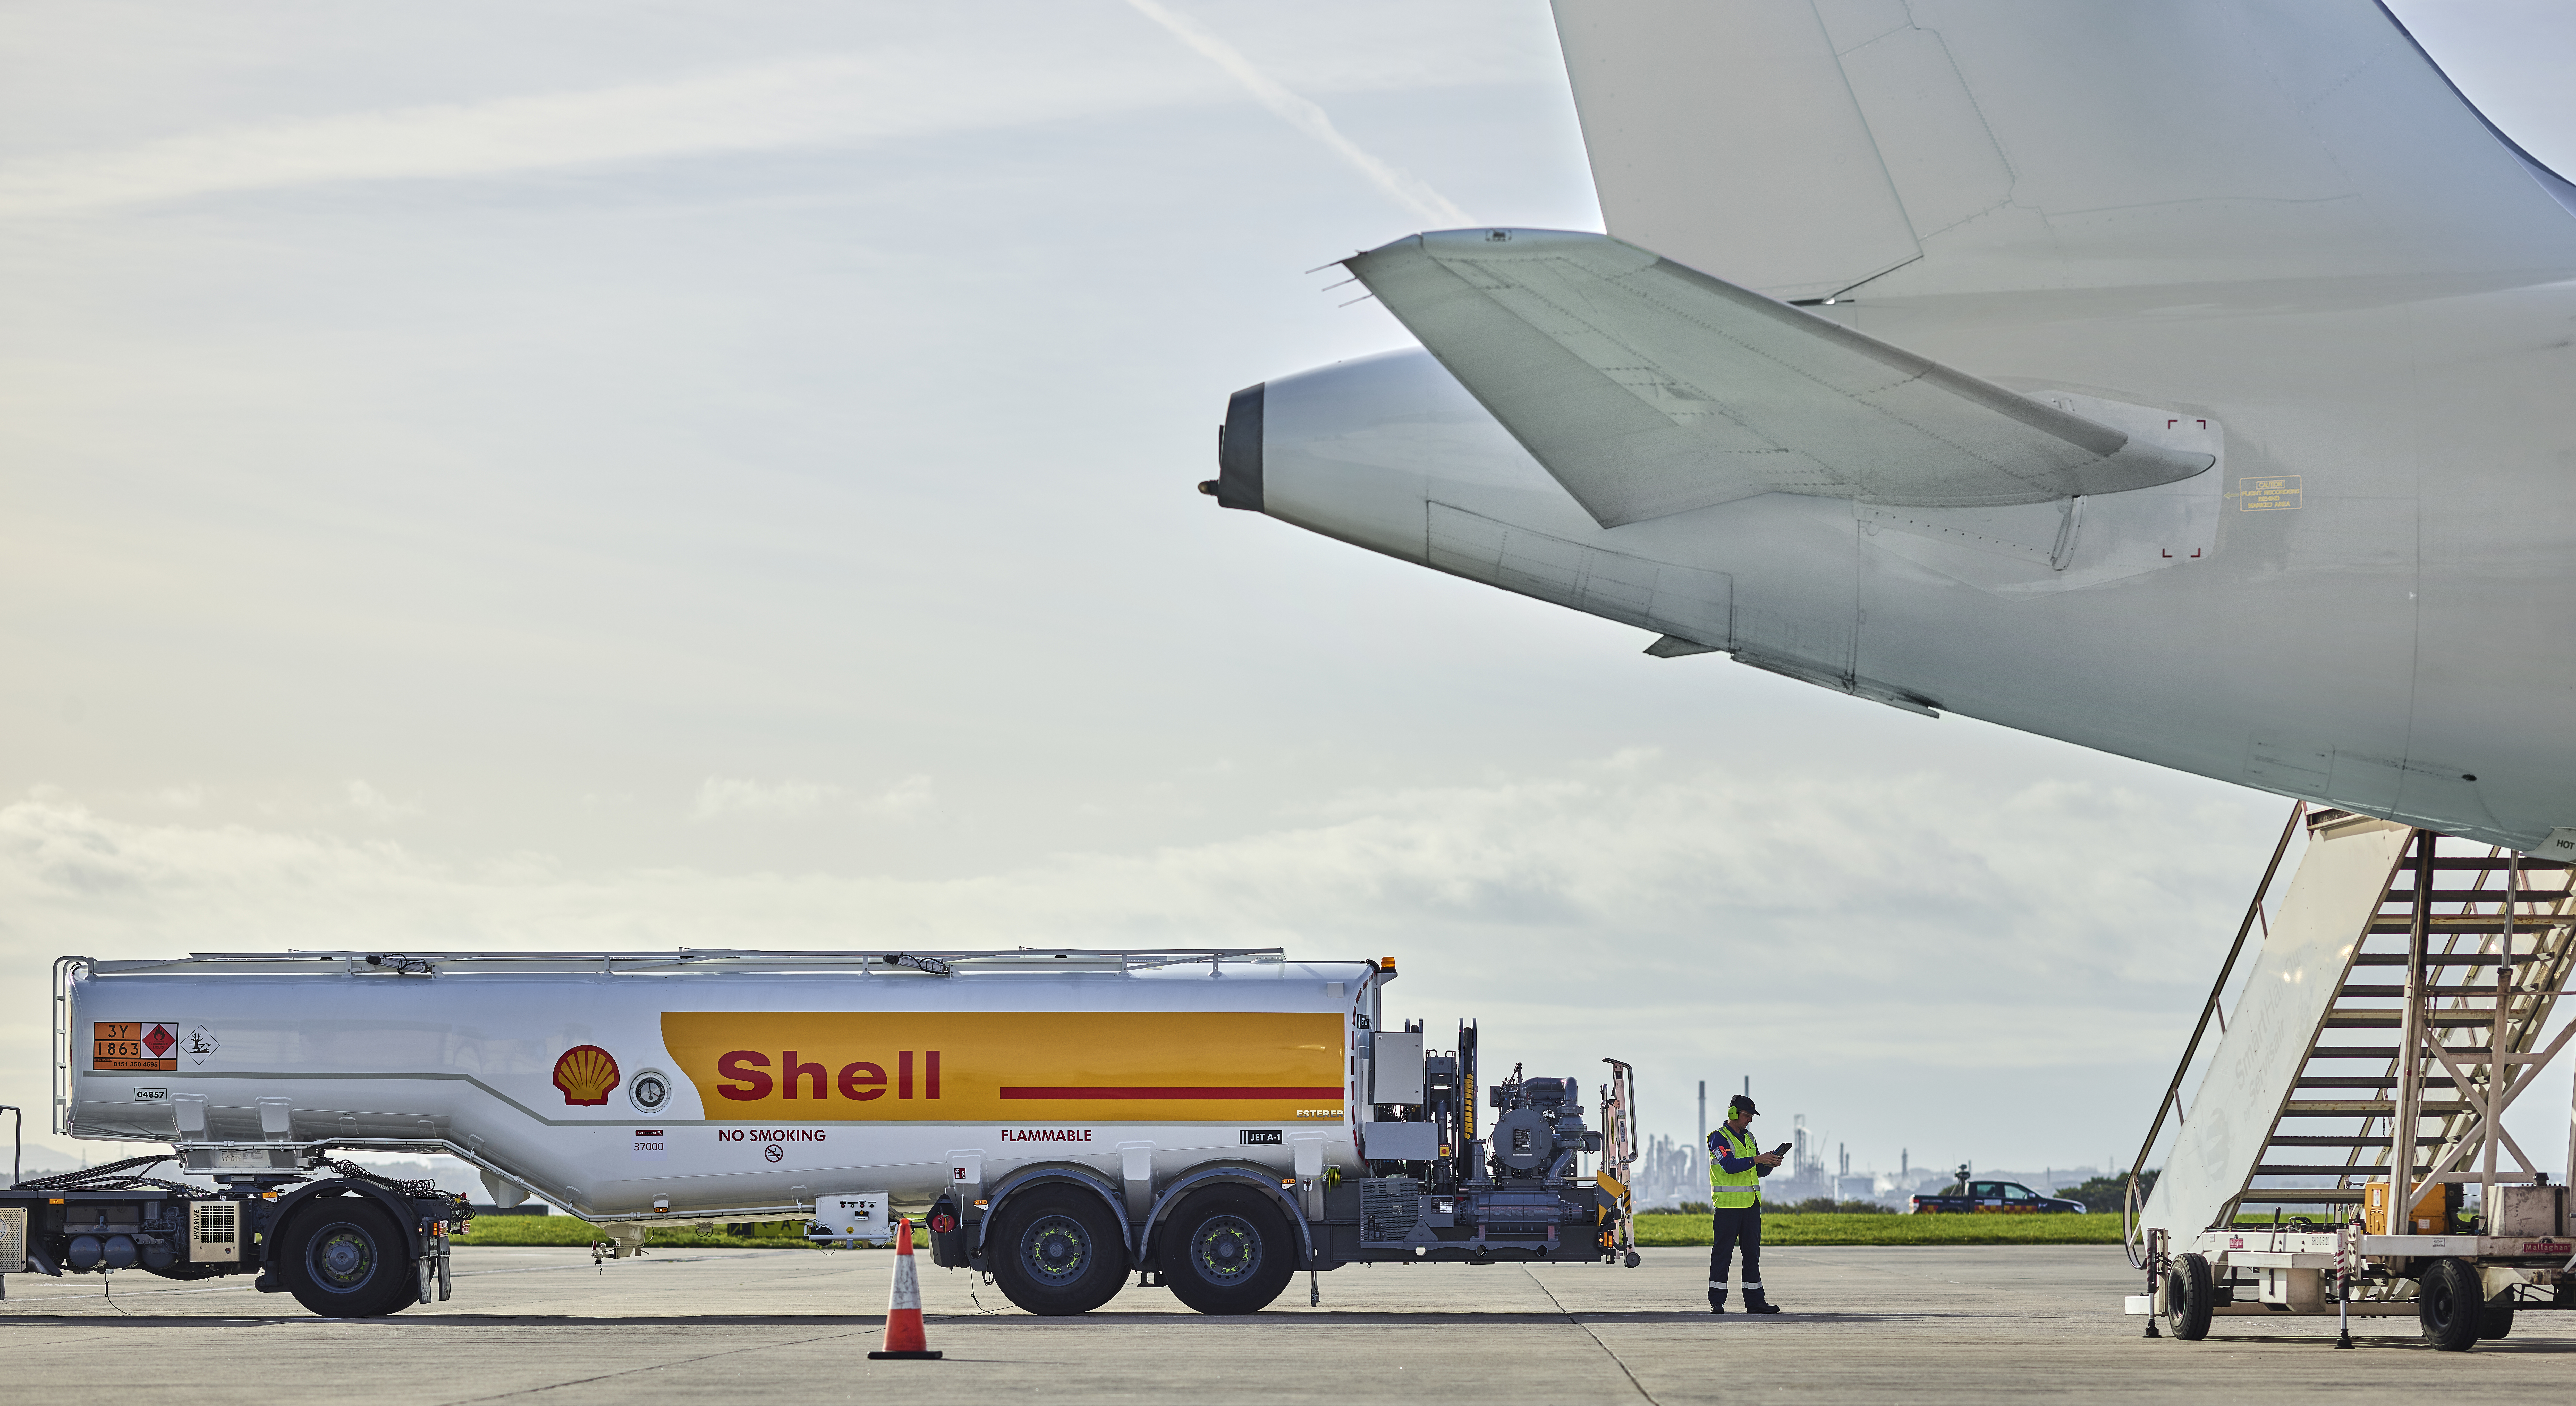 Shell aims to produce 2 million tons of sustainable aviation fuel annually by 2025.